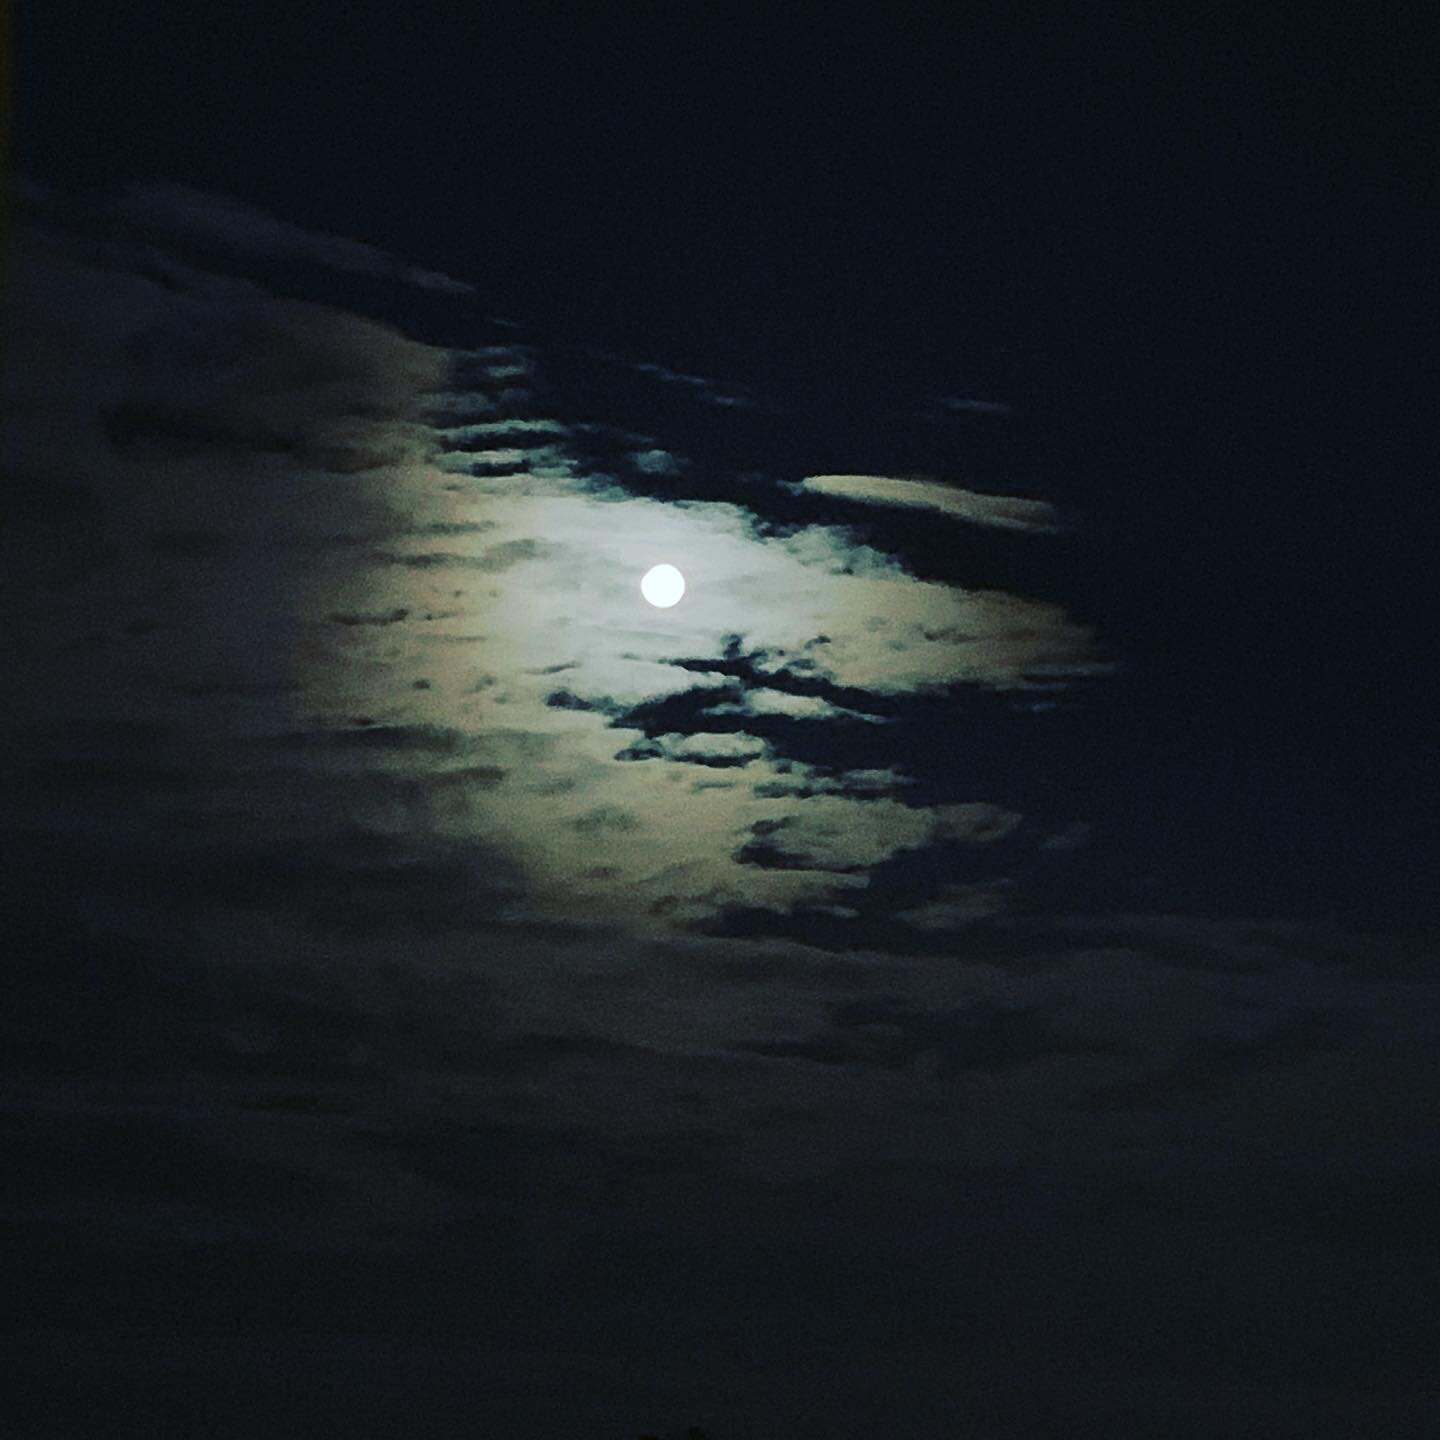 Full Moon 🌕 Friday 🥰😍
..
What rituals are you practicing? 
Comment below 👇🏽 
.
.
#fullmoon #tgif #happyfullmoon #moonchild #latenights #earlymornings #grandrising #moonrituals #sacredpractice #grandmothermoon #pachamama #grateful #moon #moonview